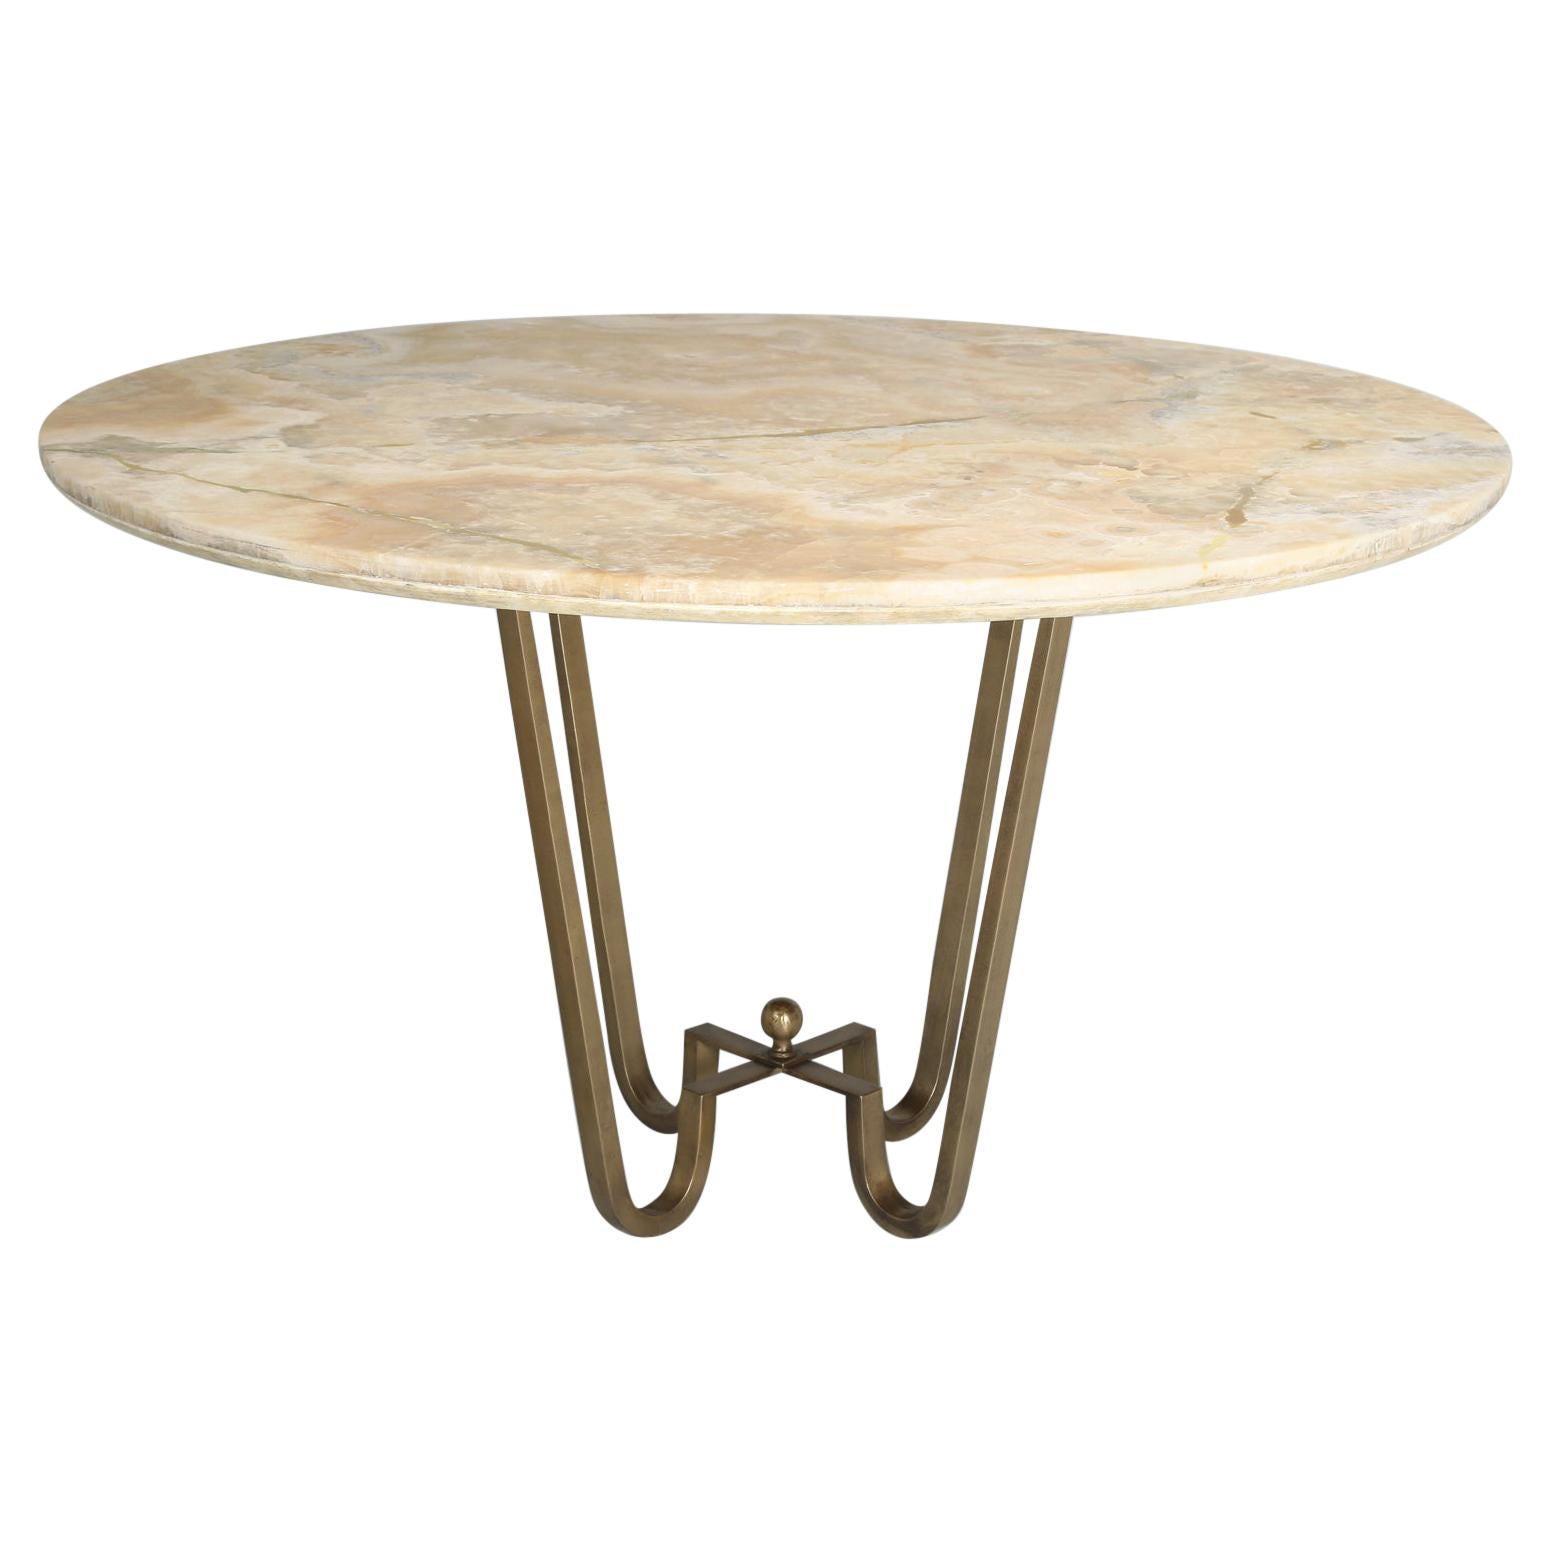 Custom-Made Center Hall Table in Cold Plated Bronze with Onyx Top in Most Sizes For Sale